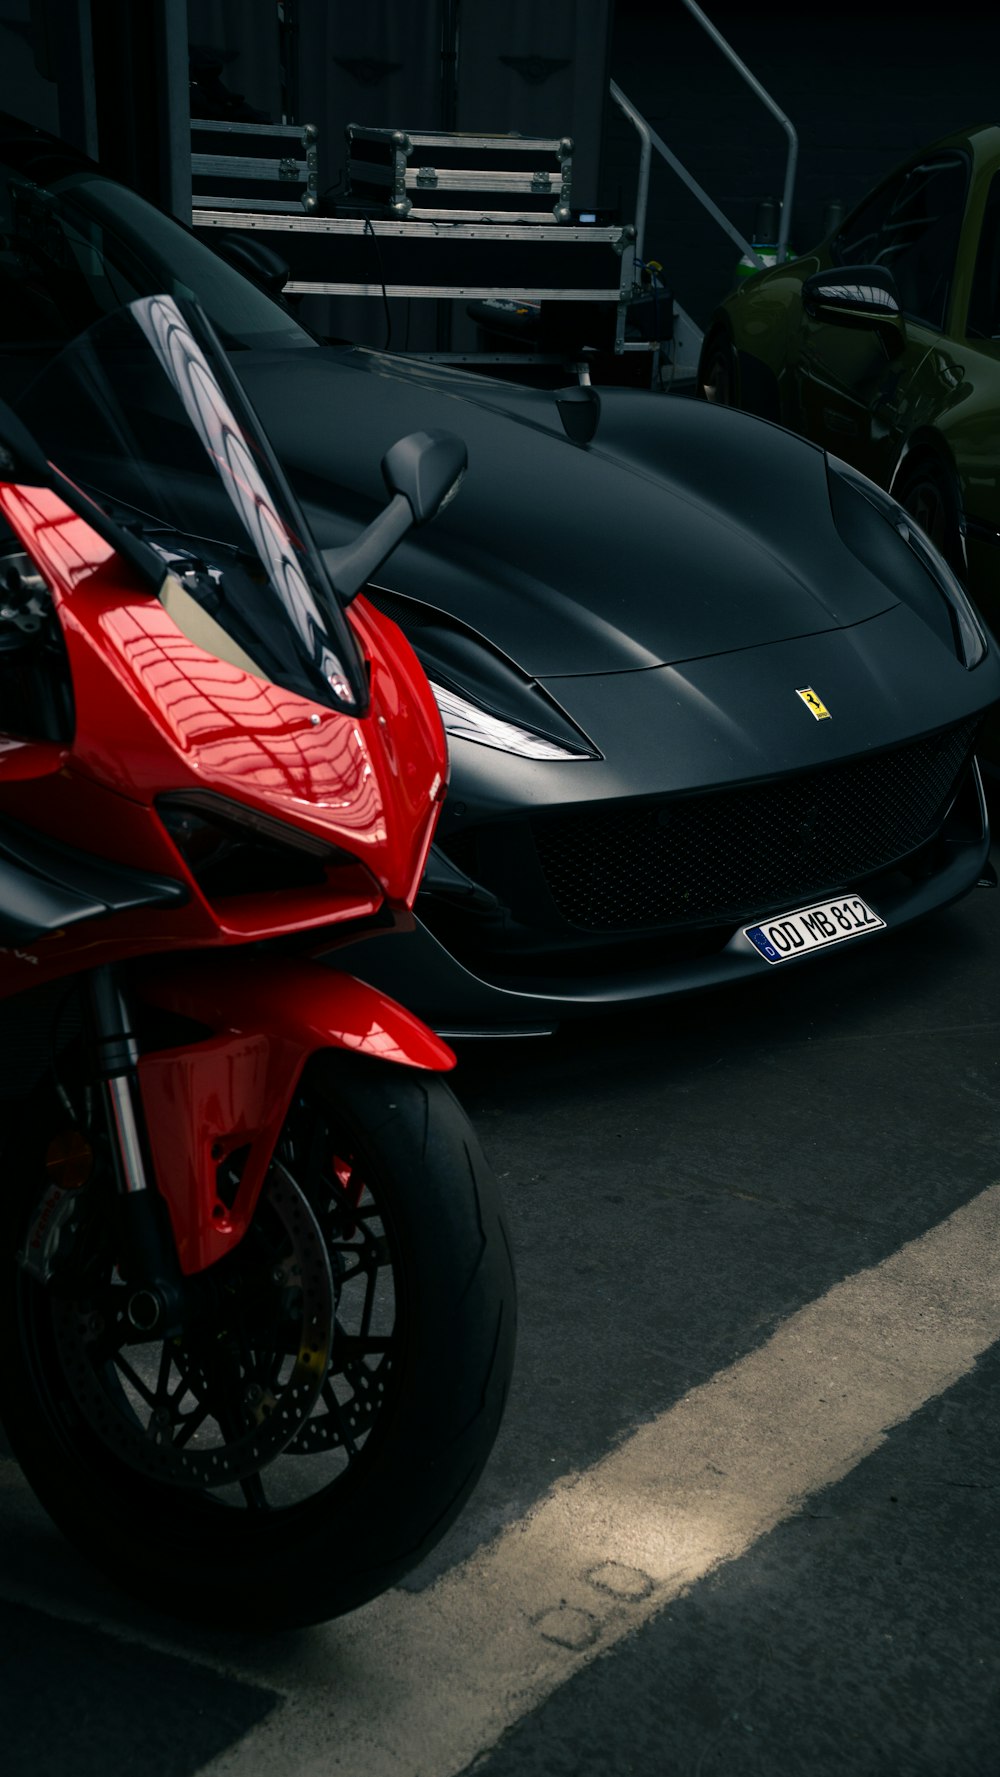 a red motorcycle parked next to a black car